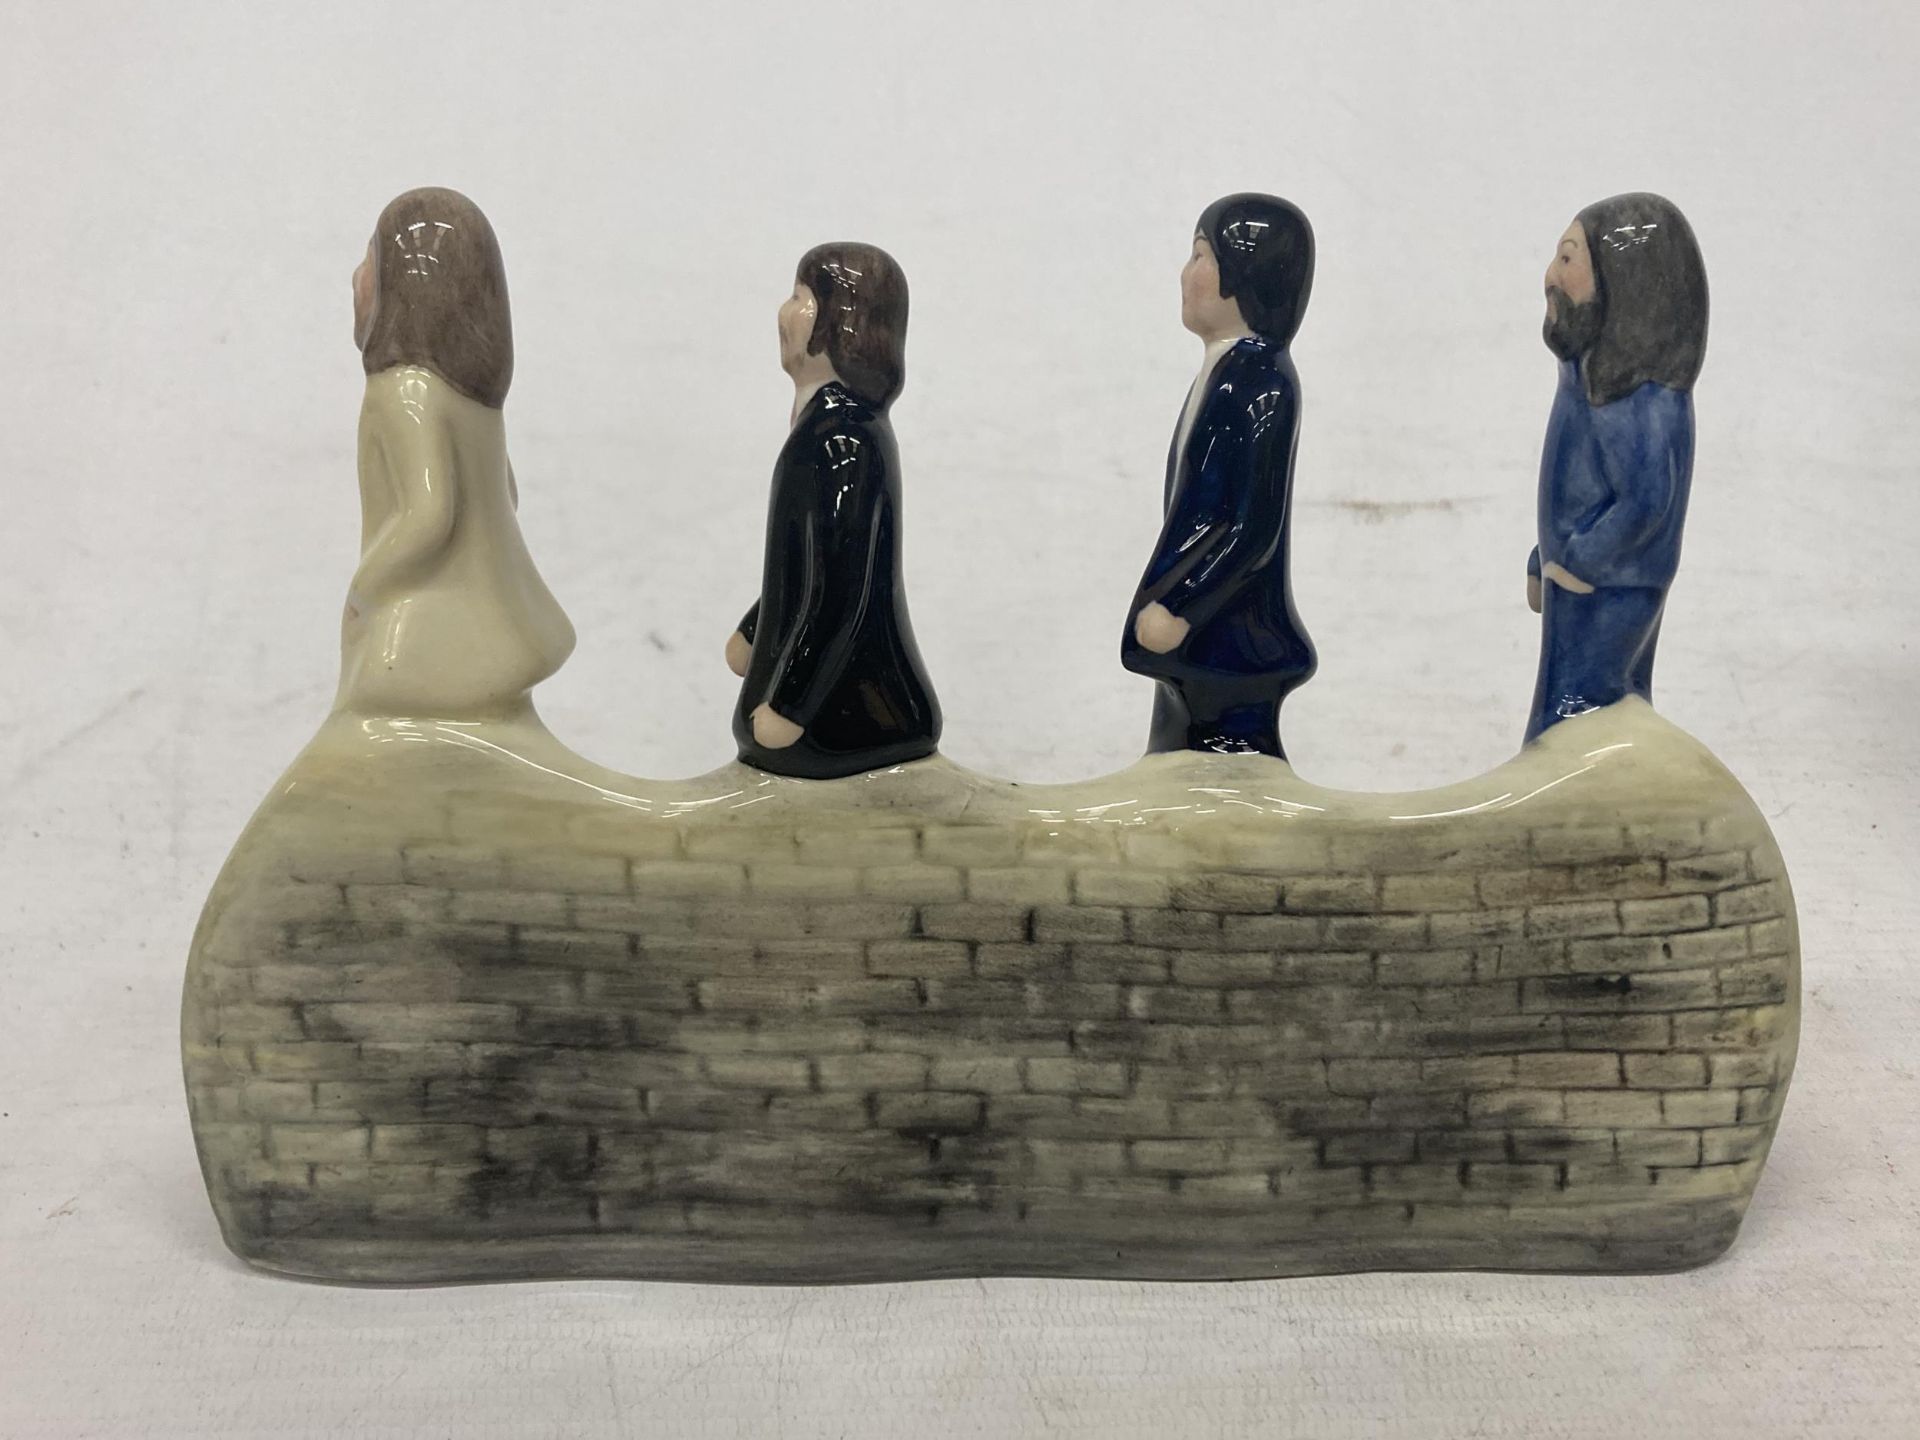 THE BEATLES ABBEY ROAD FIGURE - BAIRSTOW MANOR - Image 4 of 5